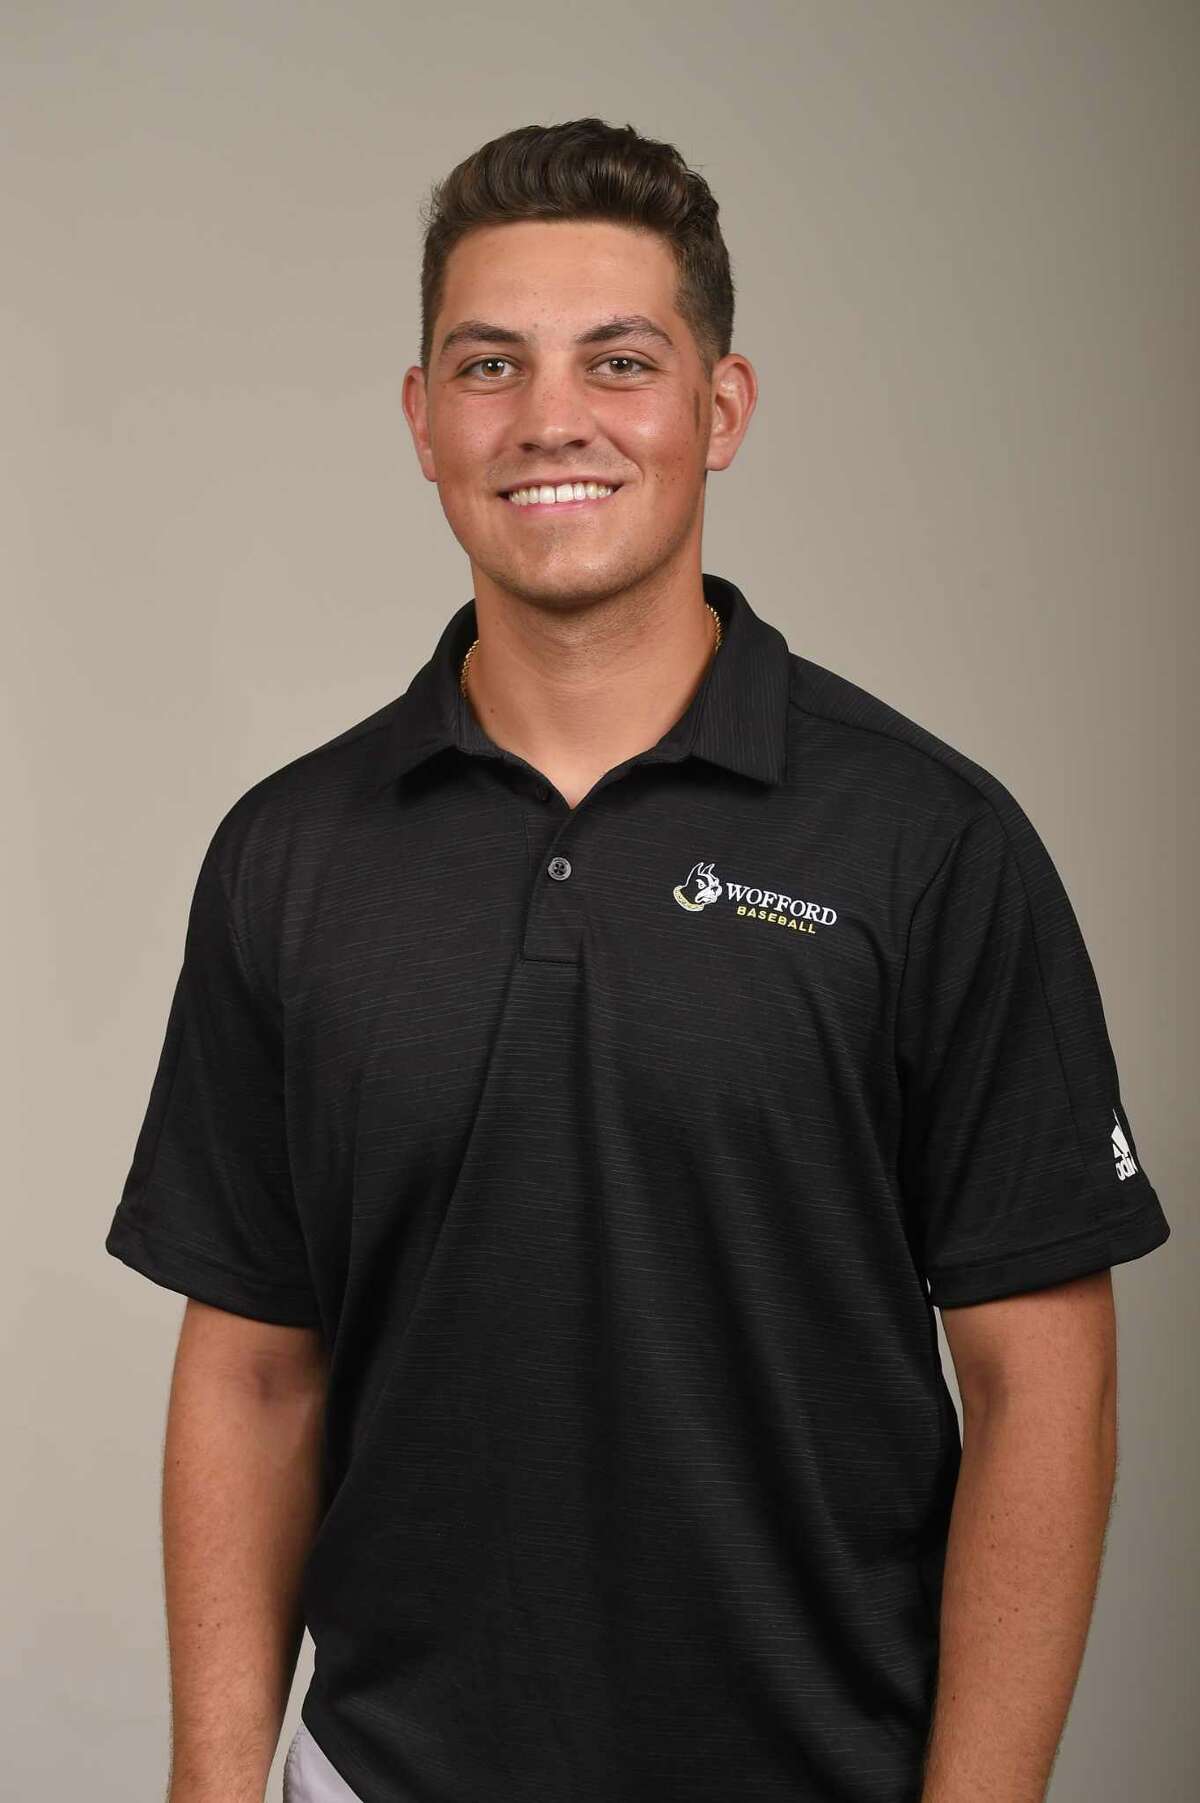 Former Warde standout Reece Maniscalco pitched 42.1 innings in relief with a 2.34 ERA in 2019 for Wofford.